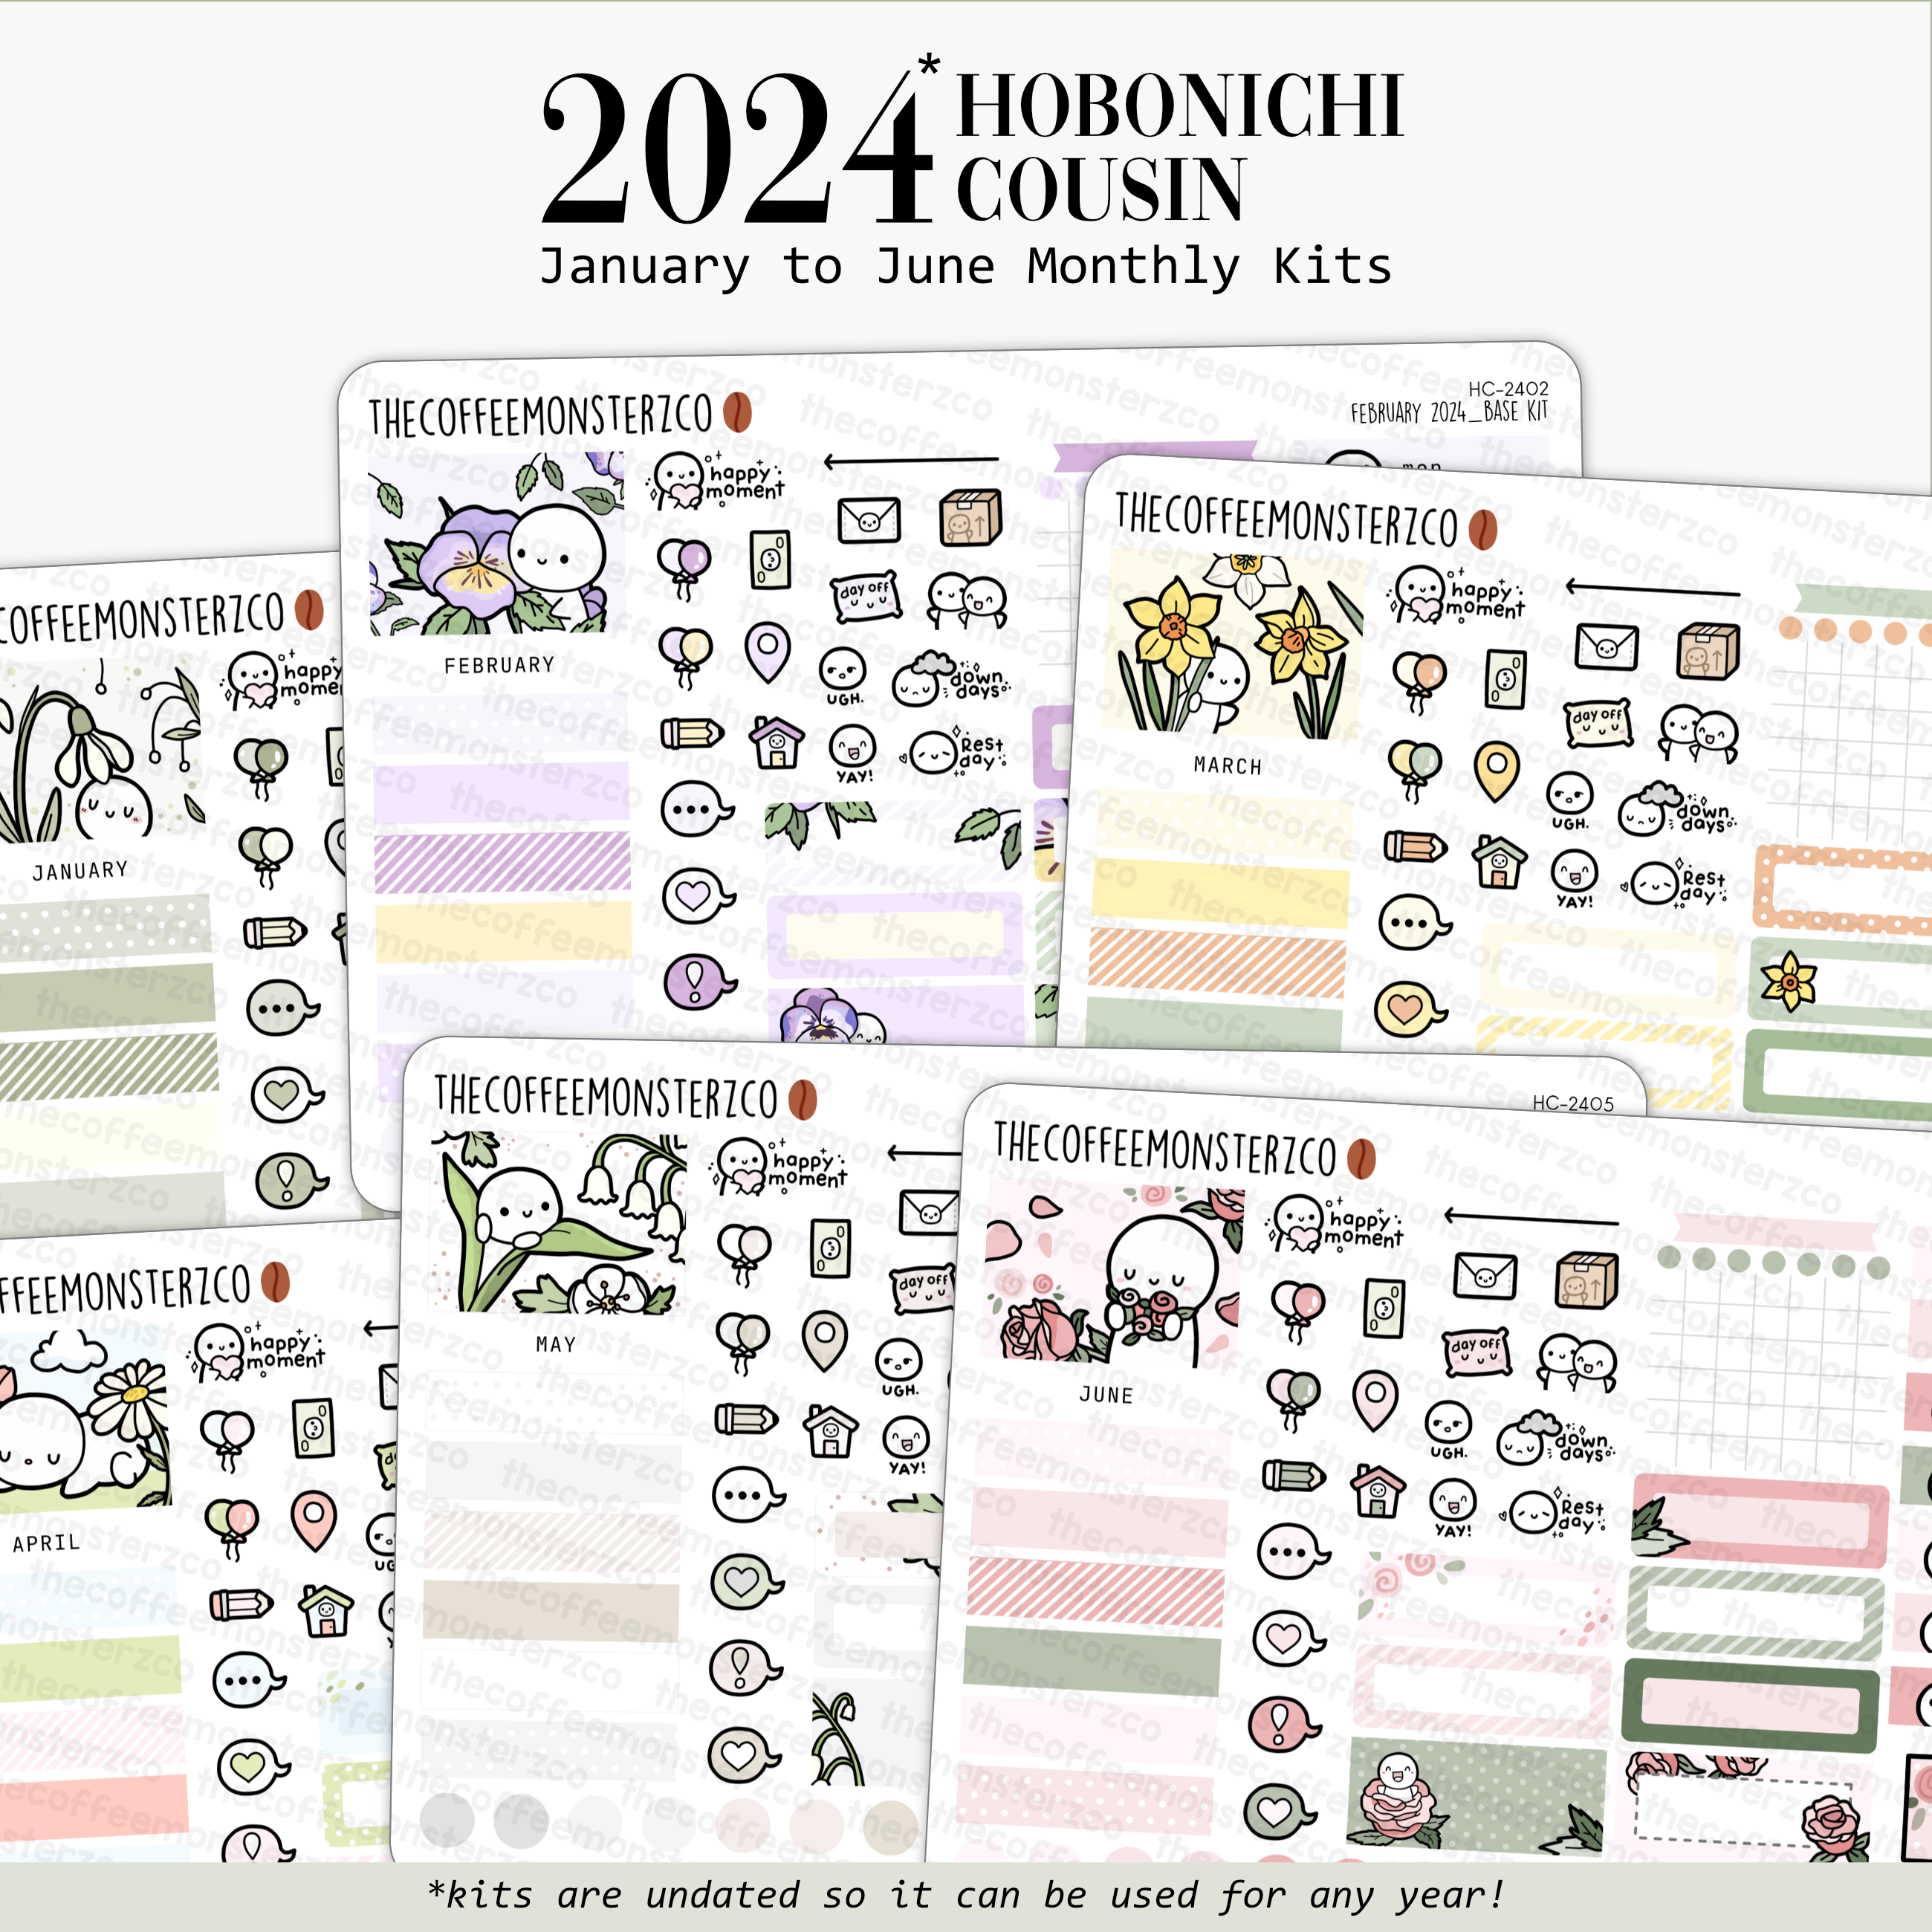 Hobonichi Cousin  2024 Yearly Overview – Pookie Bear Cuties